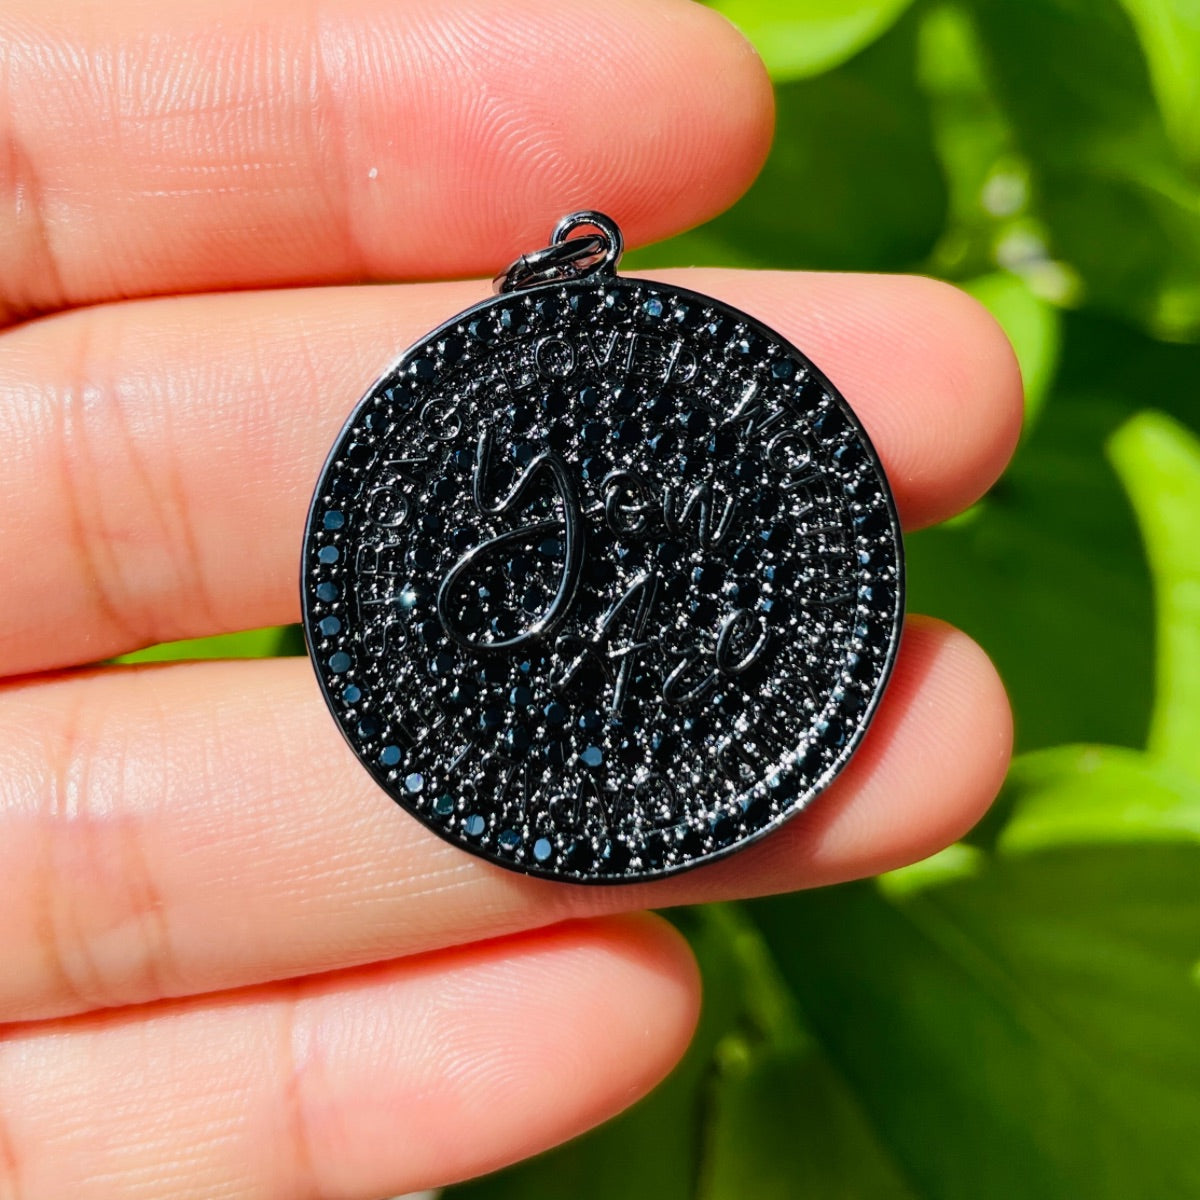 10pcs/lot 28mm CZ Pave Round Plate YOU ARE LOVED WORTHY KIND CAPABLE STRONG Quote Charms Black on Black CZ Paved Charms Discs On Sale Charms Beads Beyond